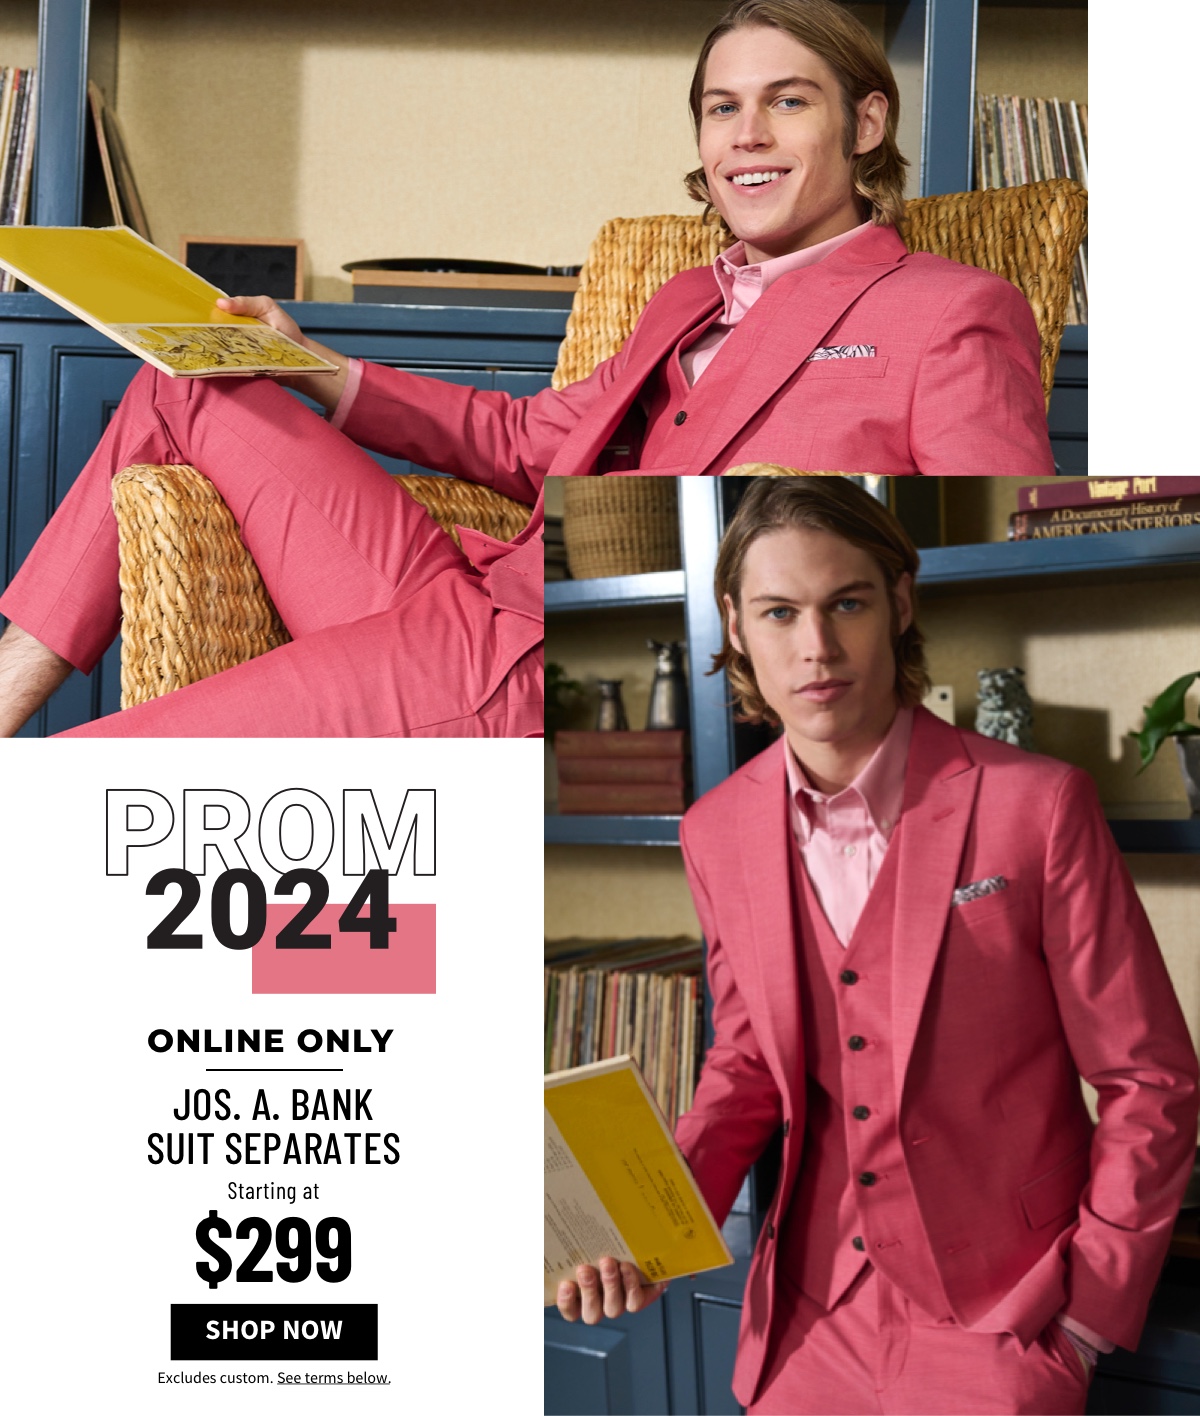 Prom 2024  Online Only Jos. A. Bank Suit Separates Starting at $299 Shop Now Excludes custom. See terms below.